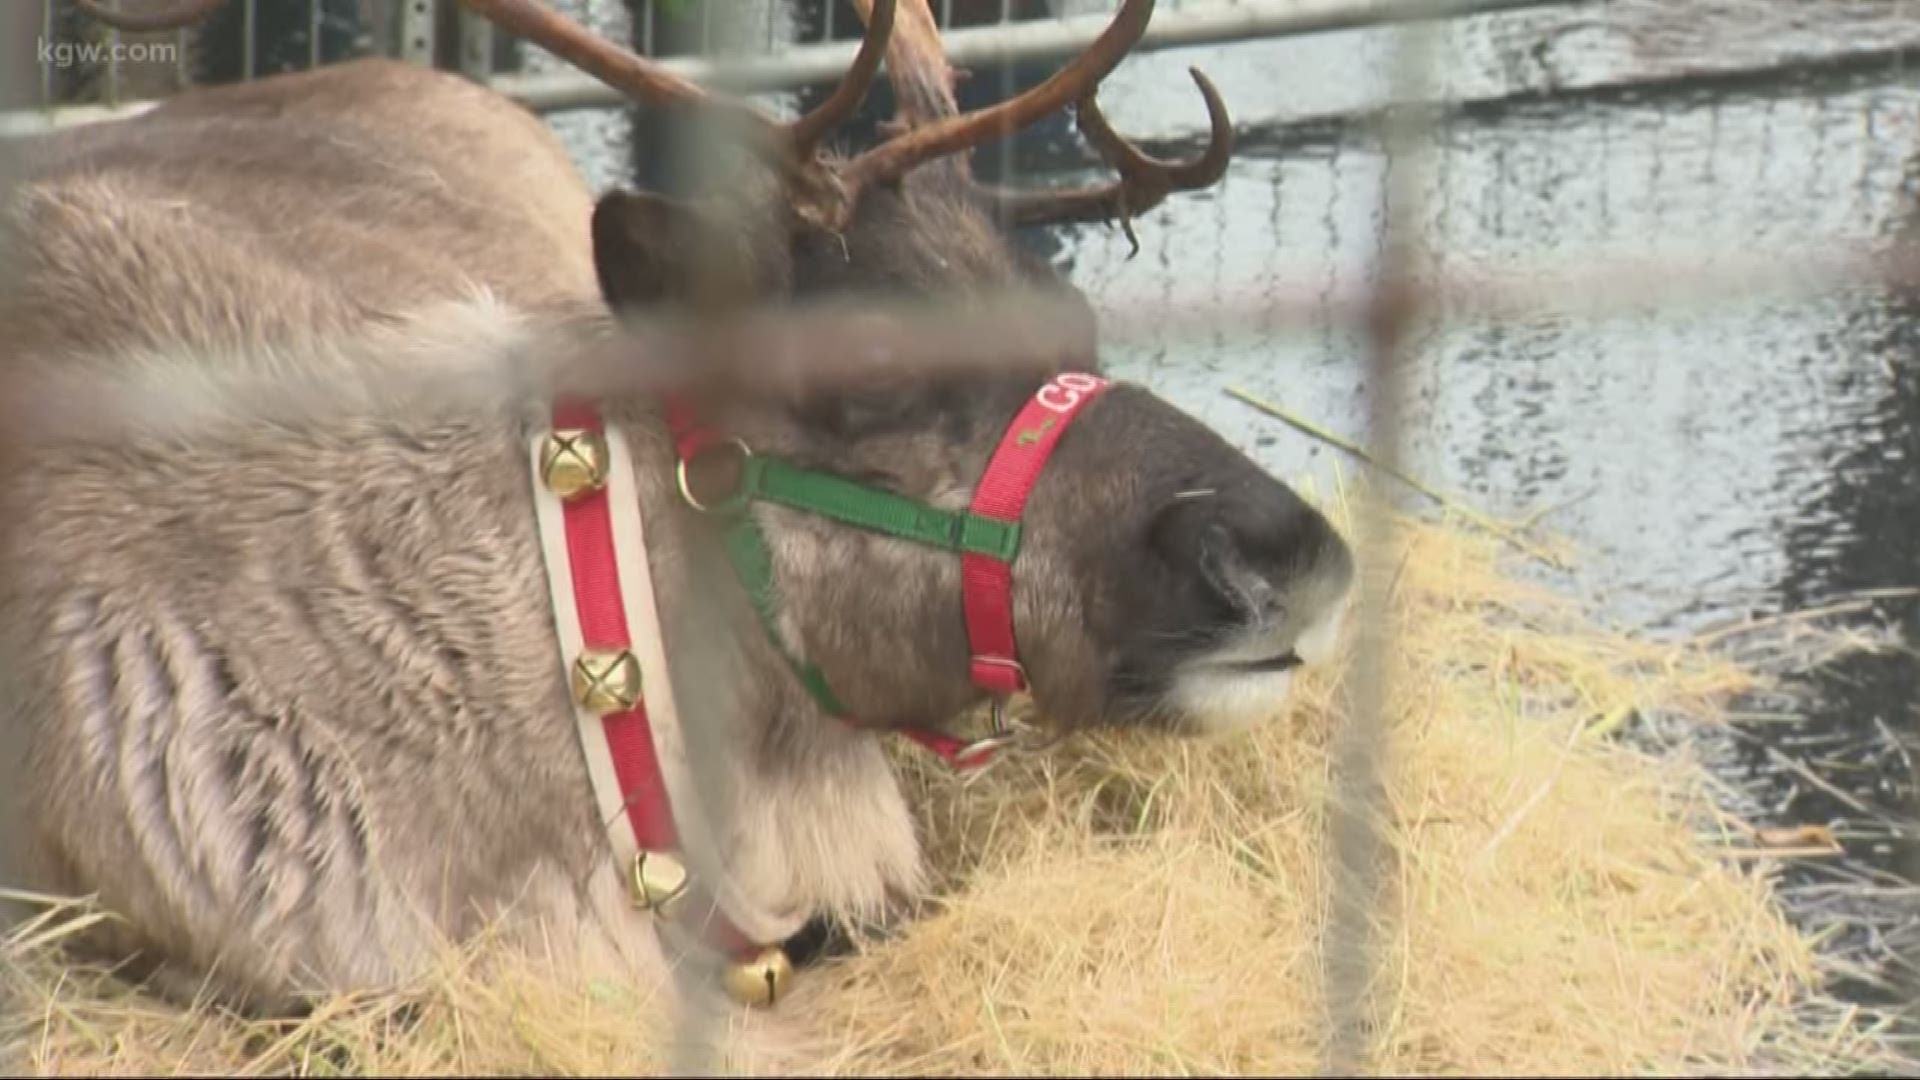 Families visit with a reindeer in Gresham